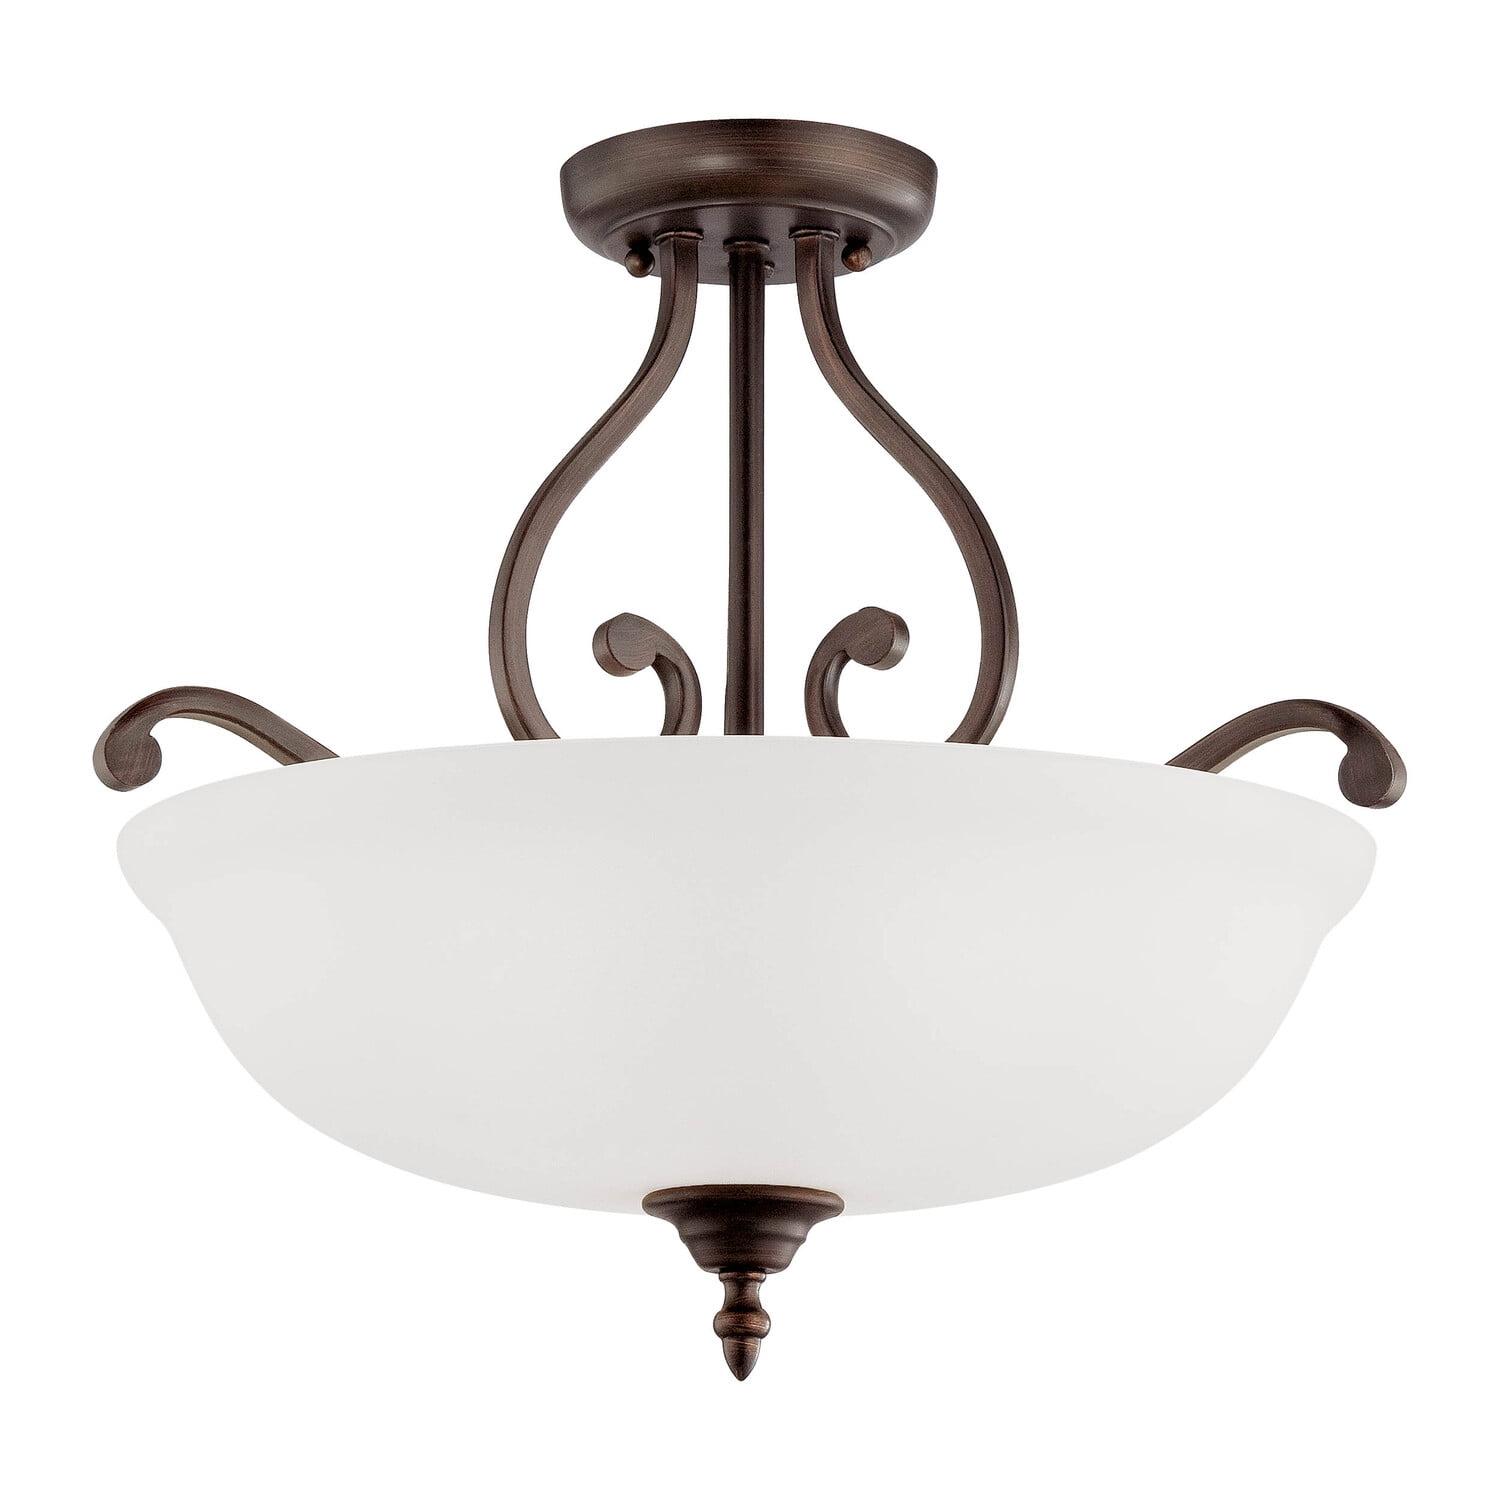 Courtney Lakes Rubbed Bronze Glass Bowl Ceiling Light